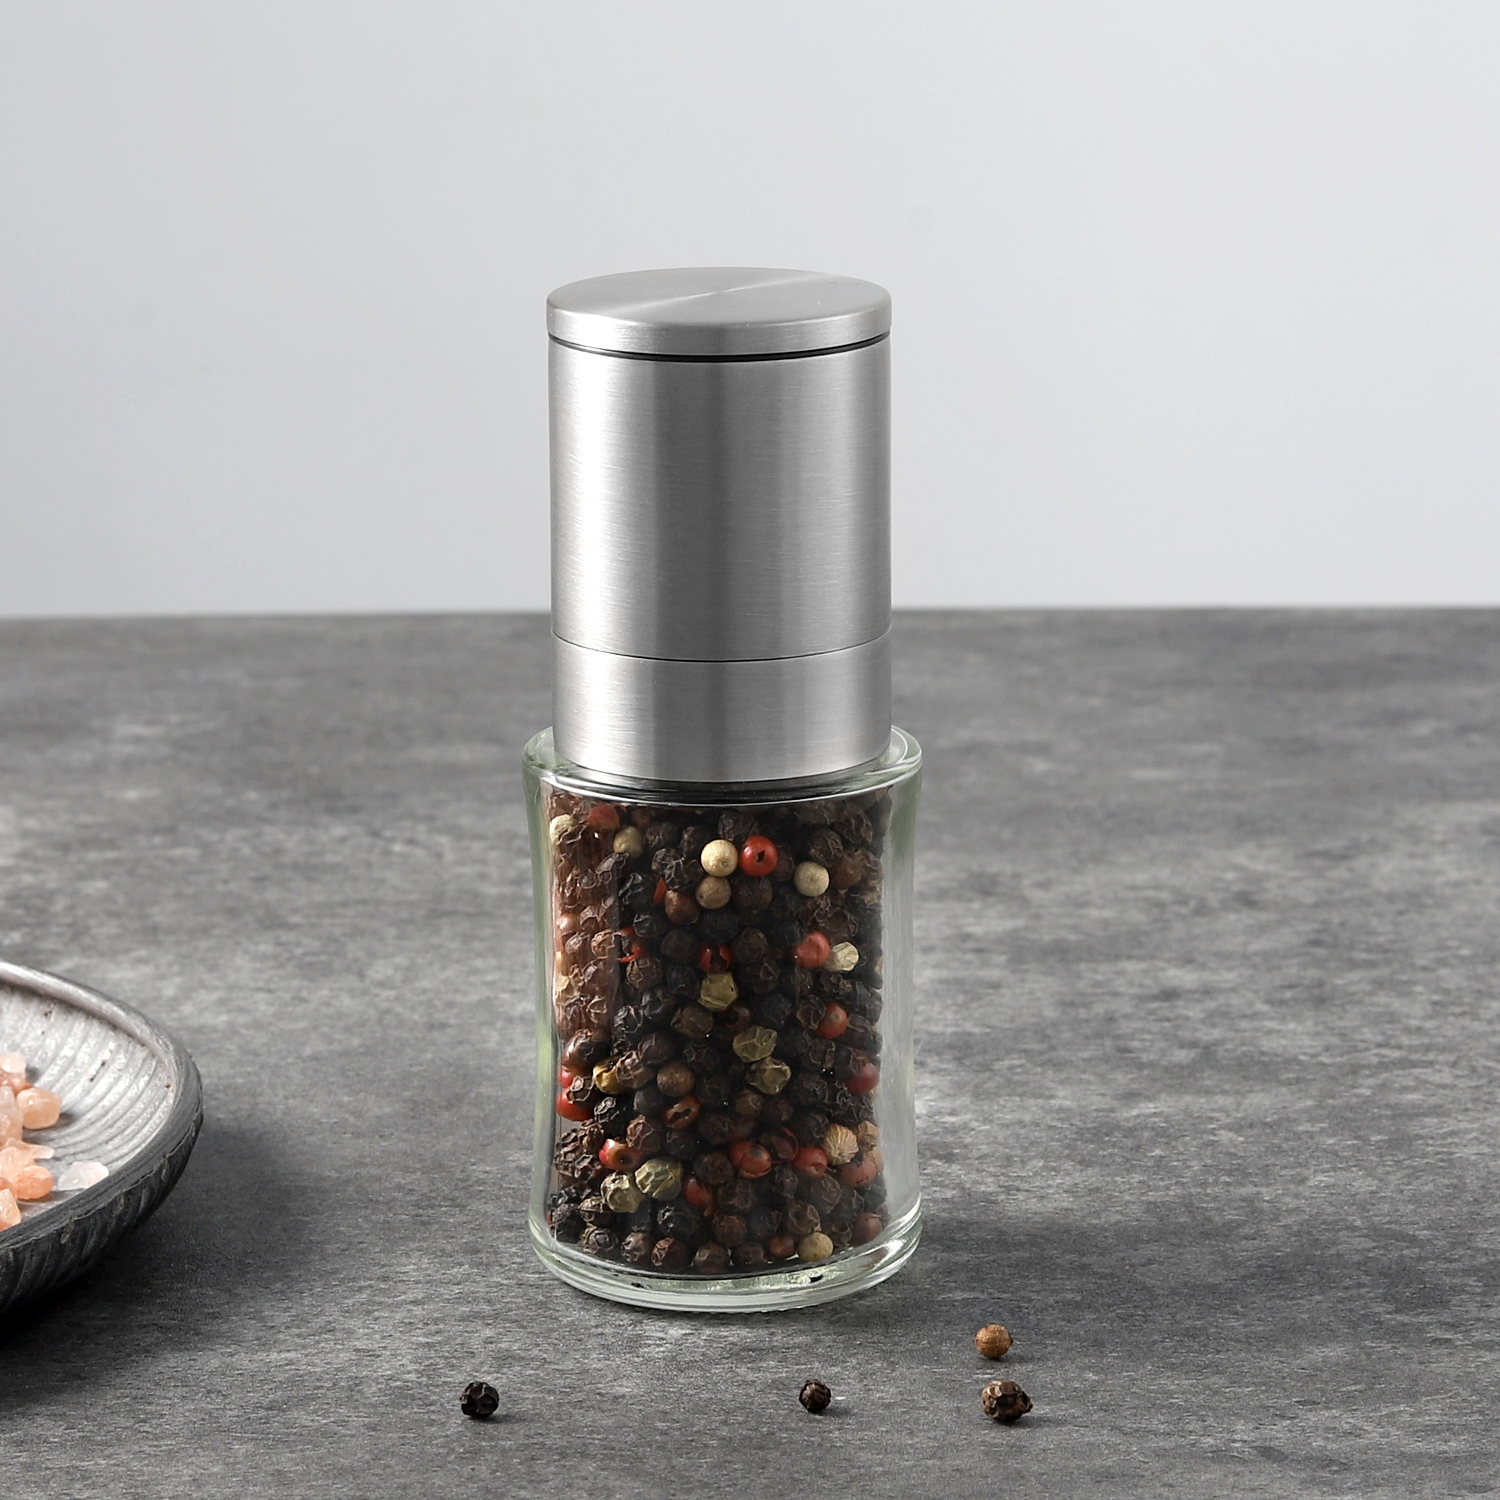 ODM Stainless Steel Pepper Grinder with Glass Bottle 